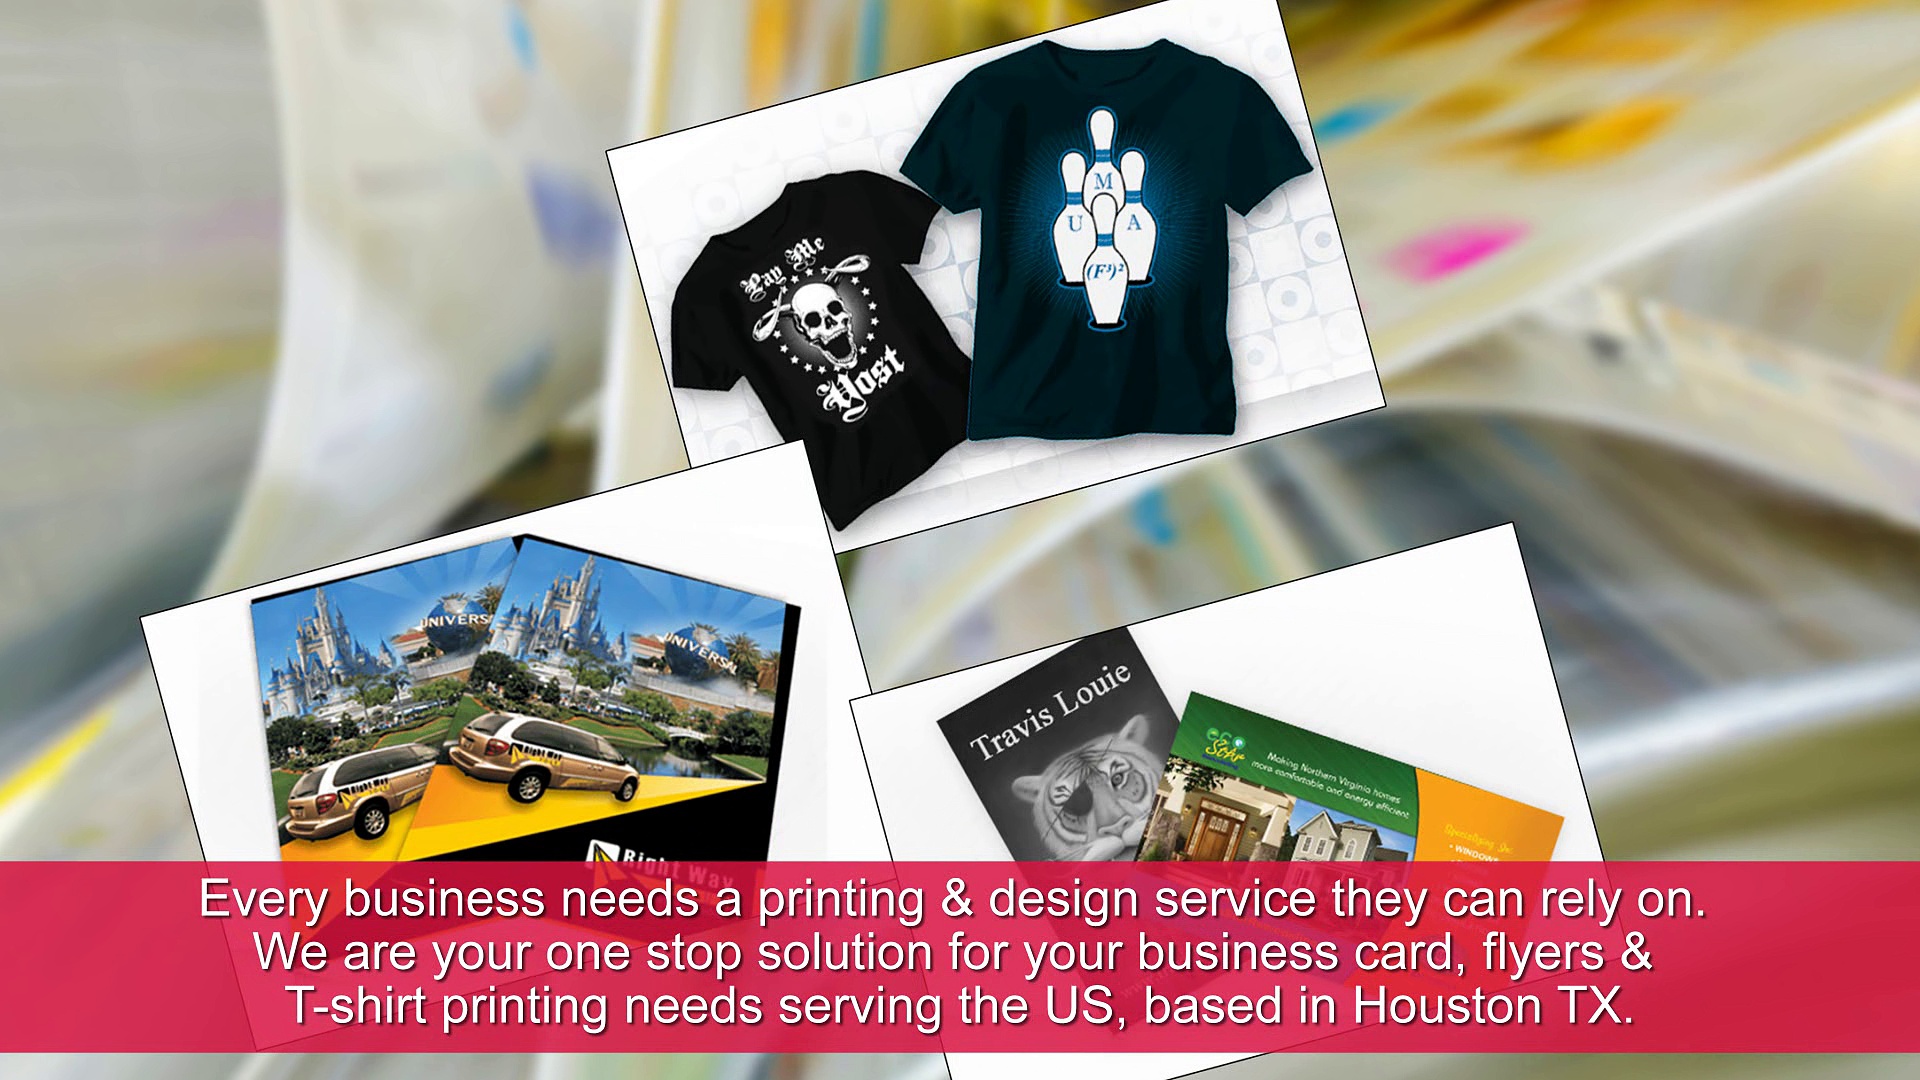 Business Card, Flyers & T-Shirt Printing Needs In Huston TX